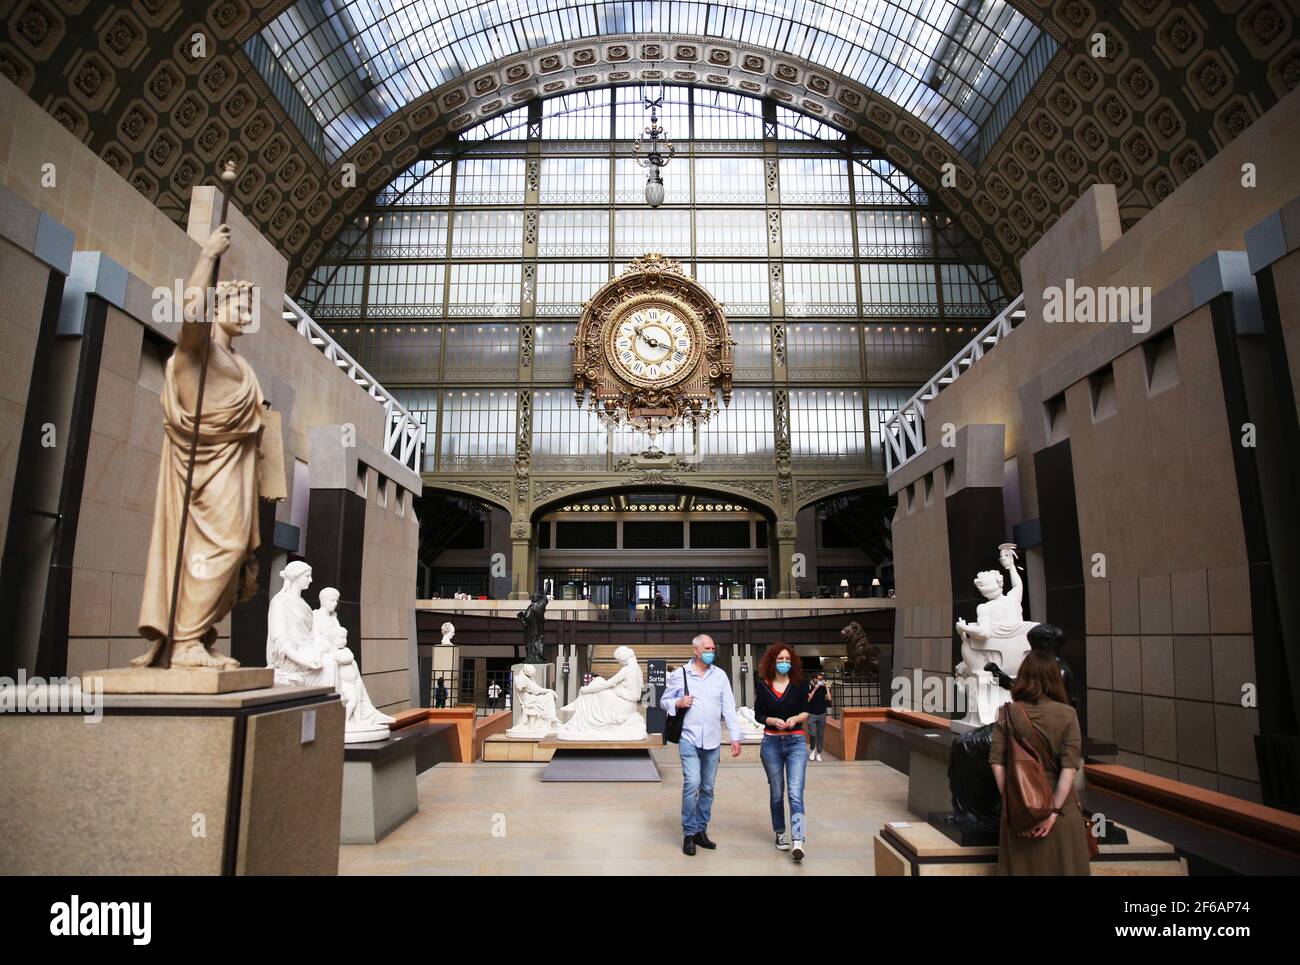 Paris, France. 23rd June, 2020. File photo taken on June 23, 2020 shows people visiting Musee D'Orsay in Paris, France. According to the French culture minister, Musee D'Orsay will soon carry the name of former president Valery Giscard d'Estaing to honor his contributions in art and culture. The official name of the museum will now be 'Les Musees D'Orsay et de l'Orangerie Valery Giscard d'Estaing'. Credit: Gao Jing/Xinhua/Alamy Live News Stock Photo